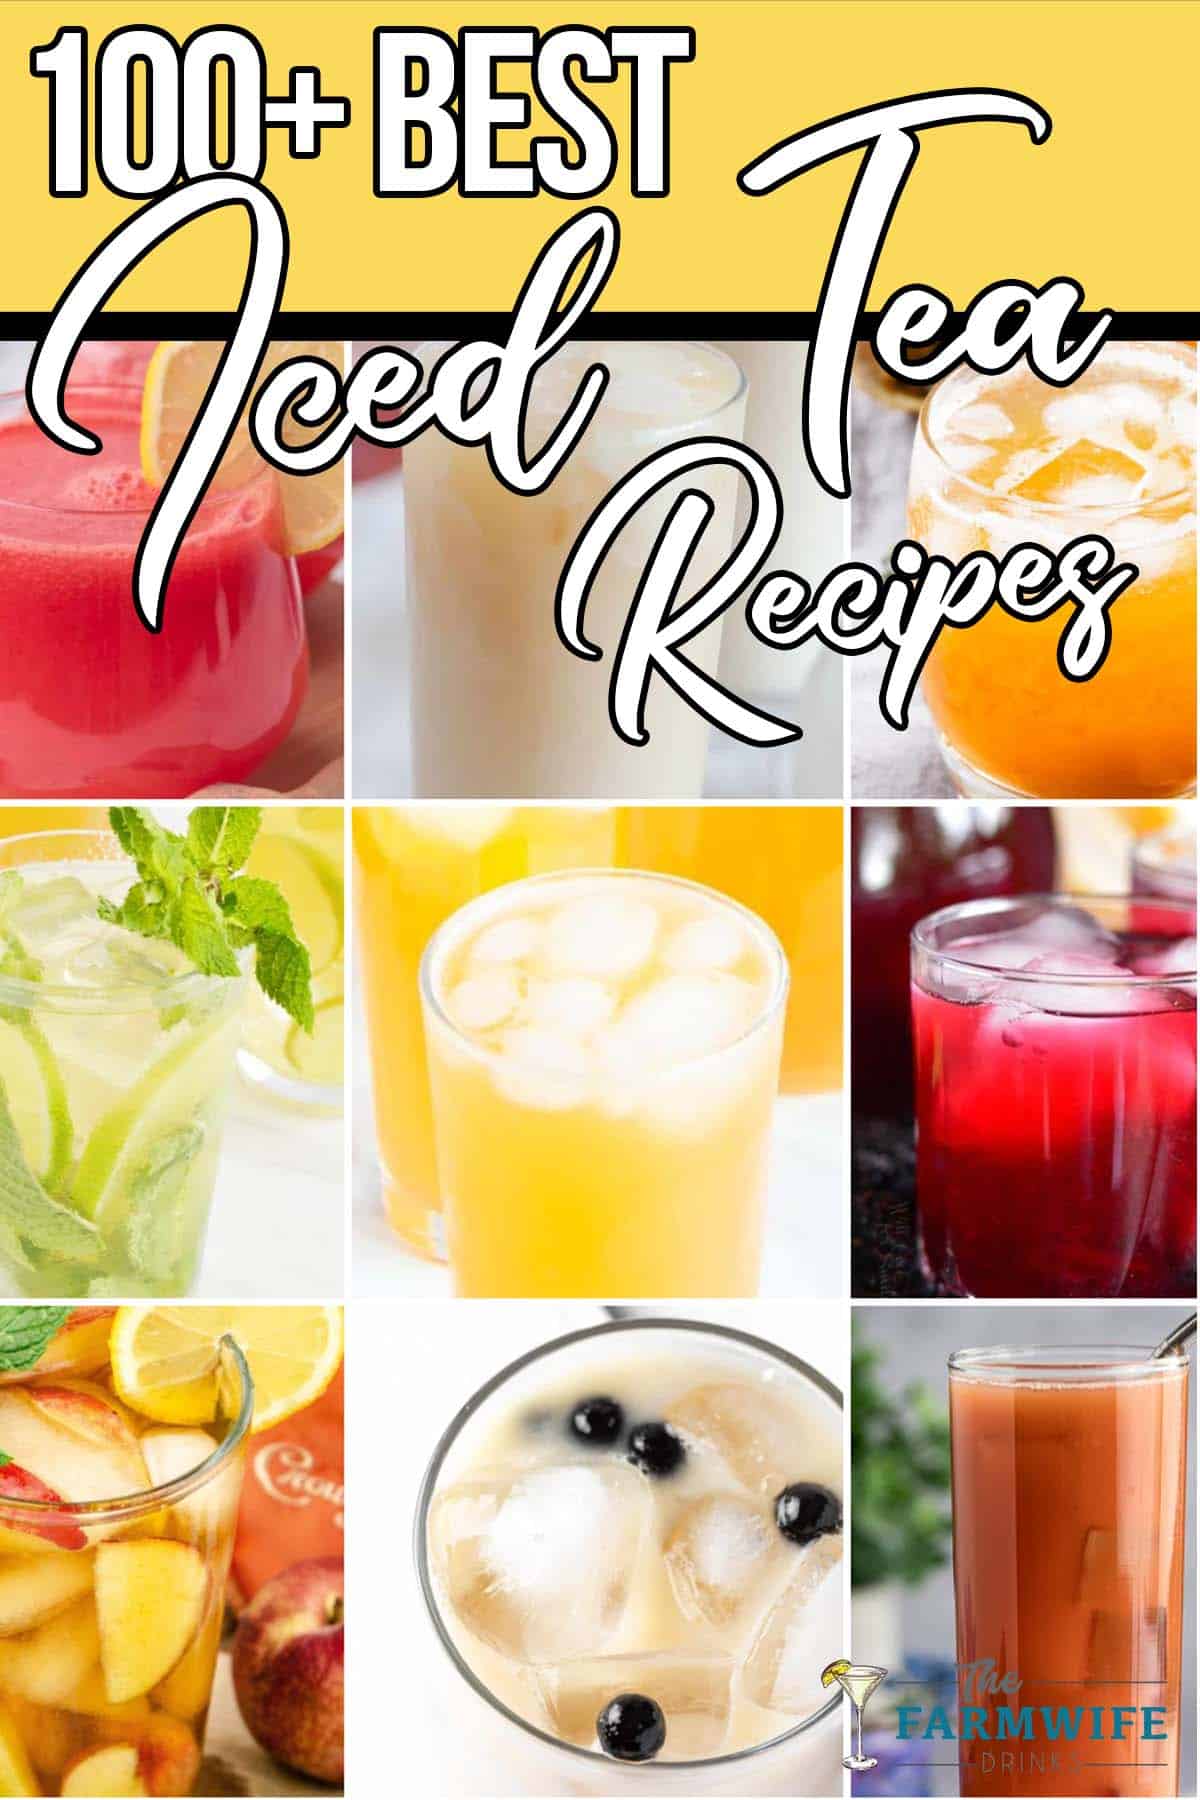 photo collage of different recipes to make iced tea with text which reads 100+ best iced tea recipes